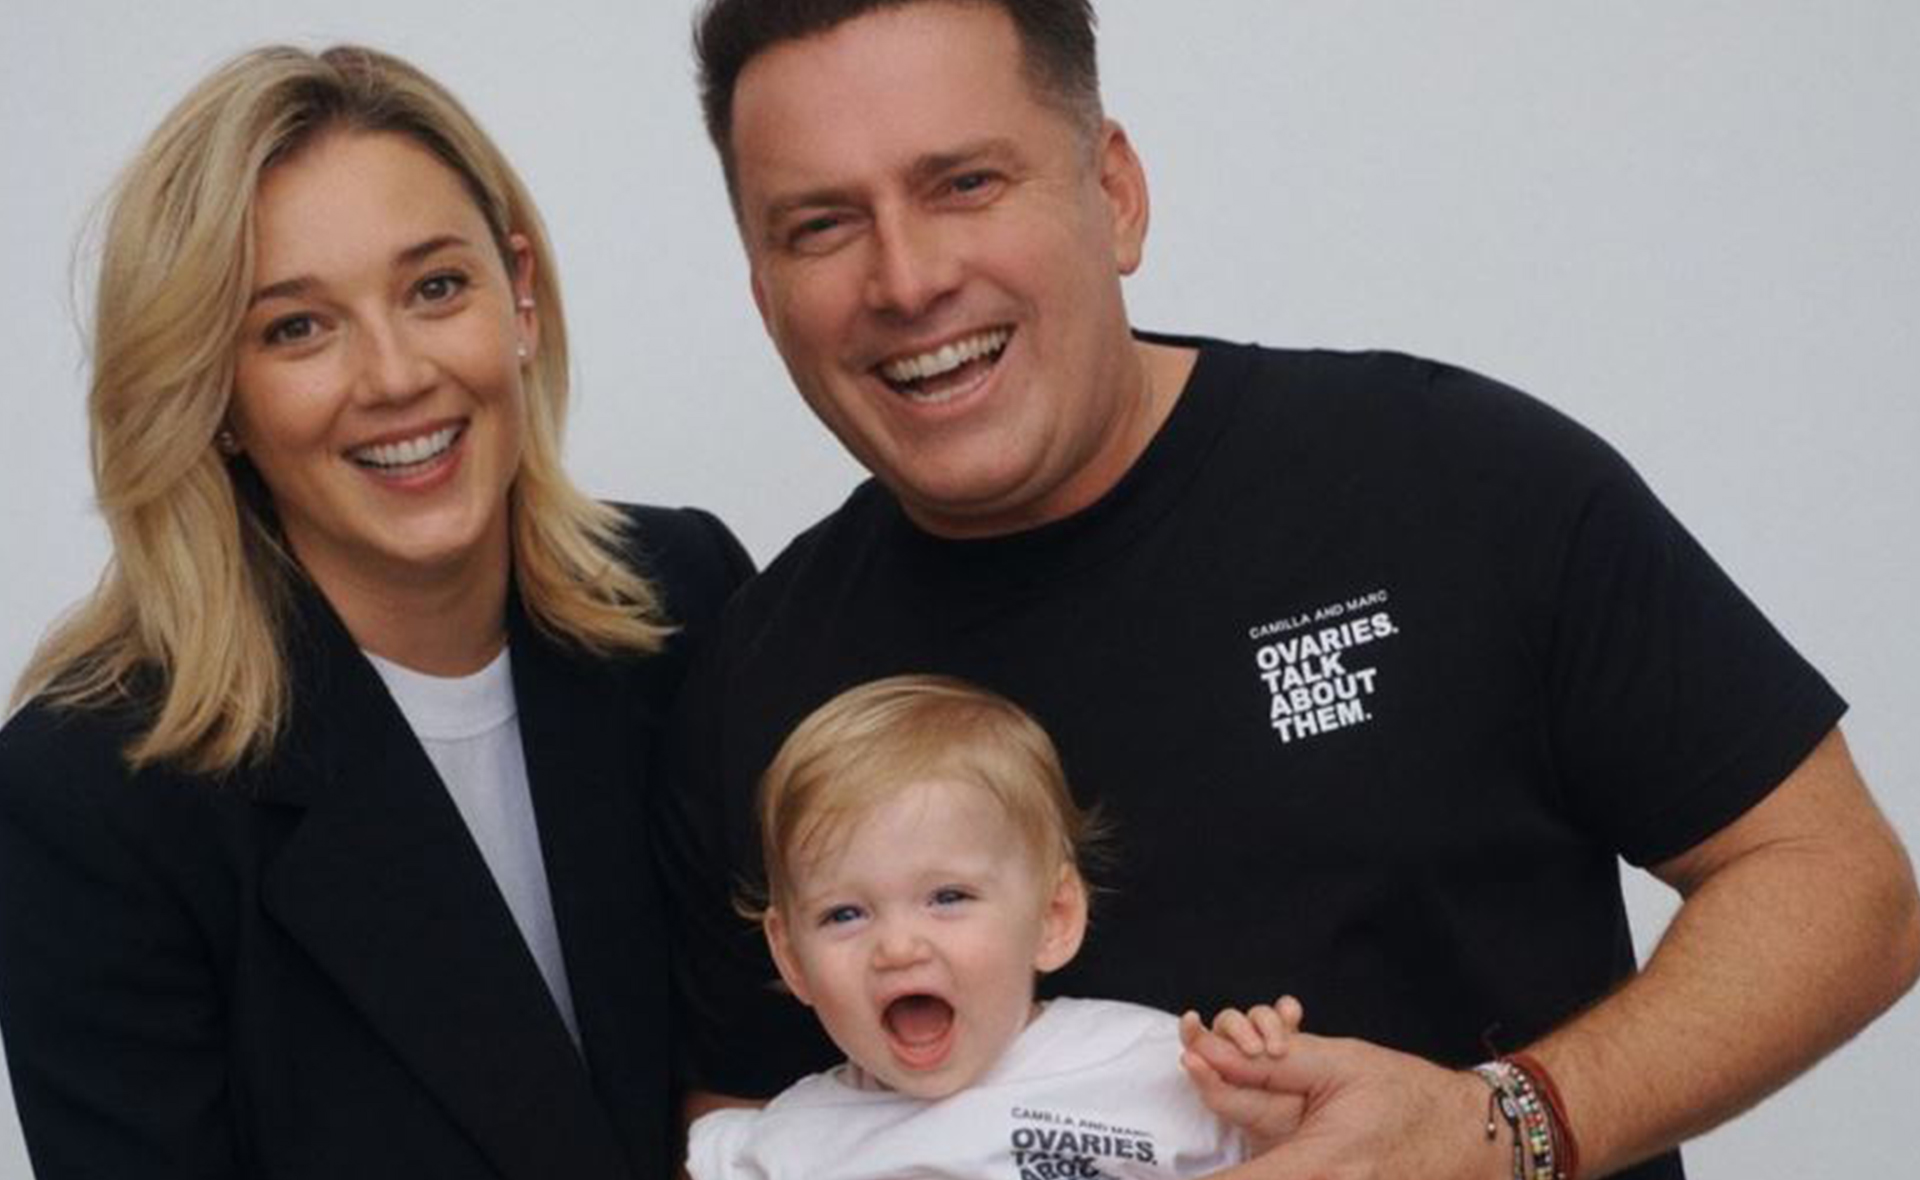 Jasmine and Karl Stefanovic look deeply in love in sweet family moment with daughter Harper